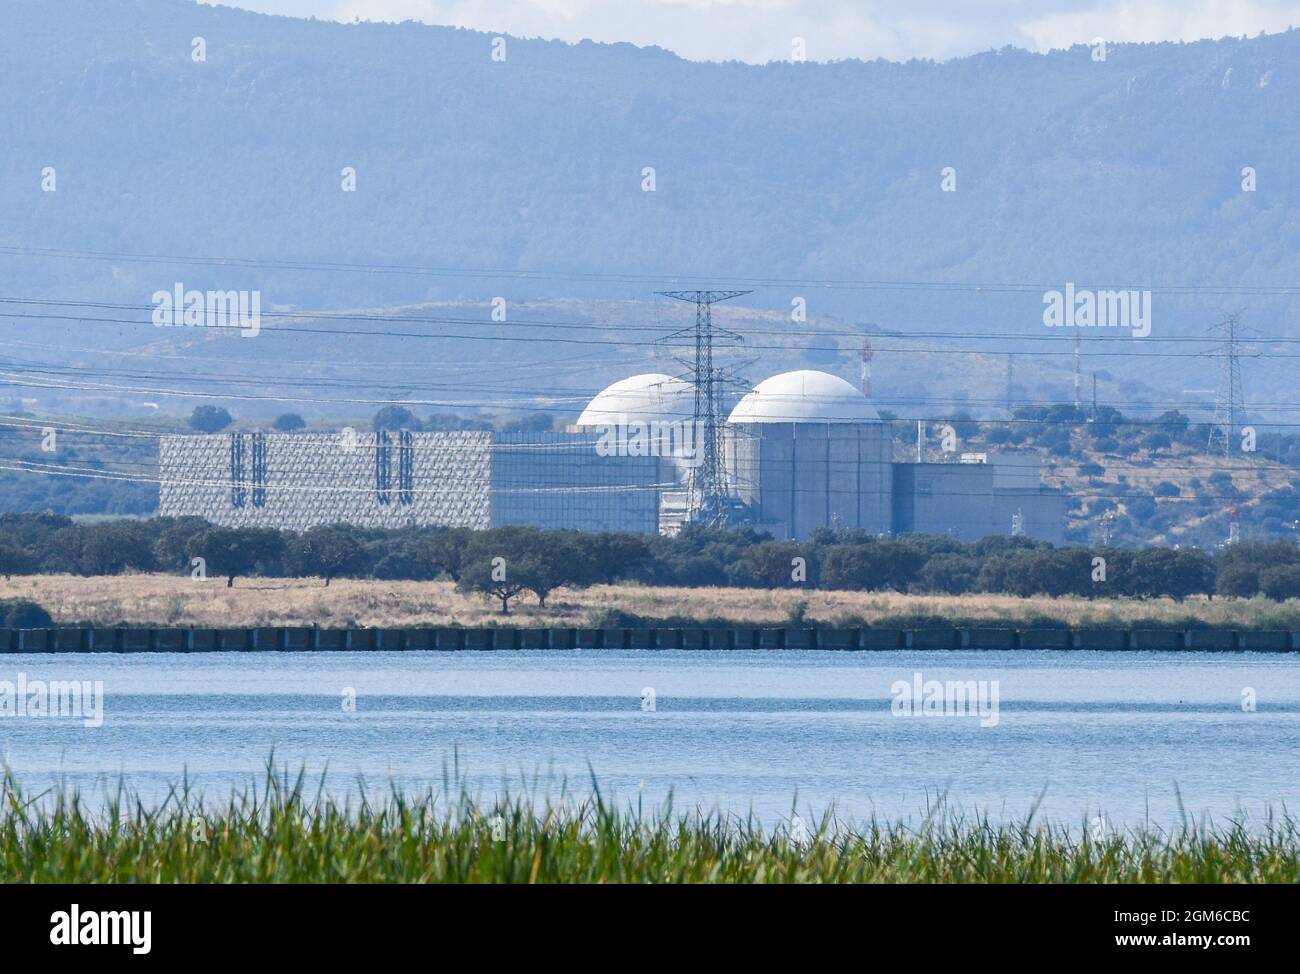 View of the Nuclear Power Plant of Almaraz in Caceres. Property of Iberdrola Generación Nuclear, S.A.U. (53%), Endesa Generación, S.A.U (36%) and Gas Natural Fenosa Generación, S.L.U. (11%), this is one of the nuclear power plants that could close because the generation of electricity could not be profitable for the owners with the Government measures. Spanish Government has targeted €2.6bn in “excess profits” from utilities that do not use gas but have benefited anyway from the way rising gas prices have driven electricity prices higher. However, Spain's nuclear power association said the ne Stock Photo